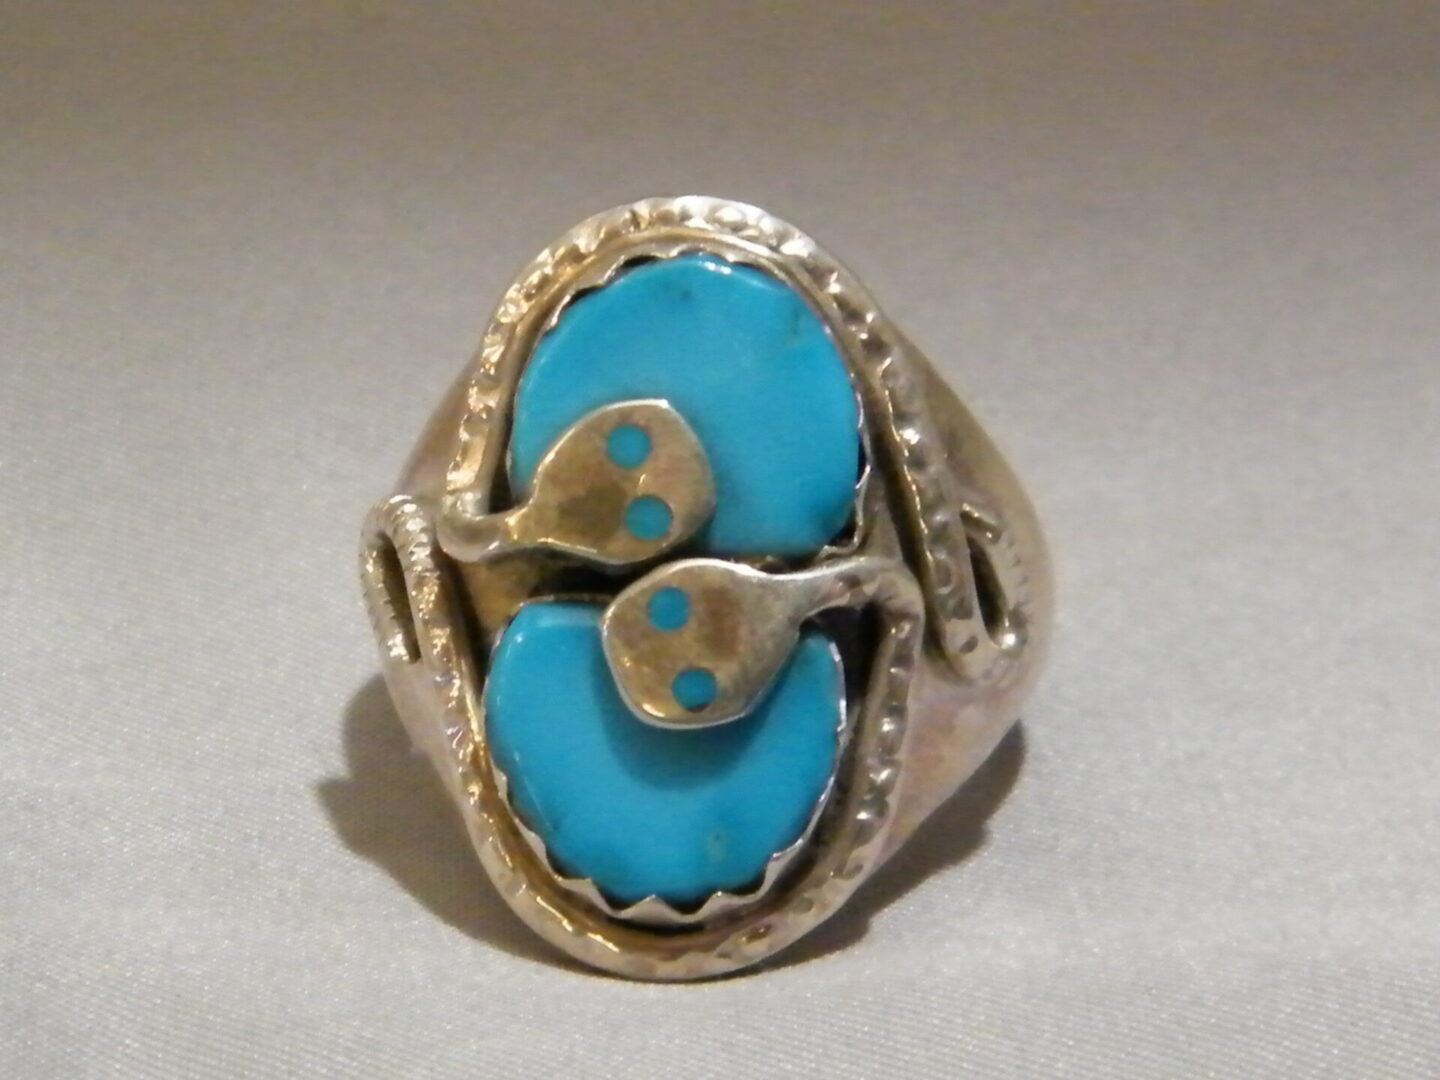 A Blue Color Stone Ring With Snake Pattern